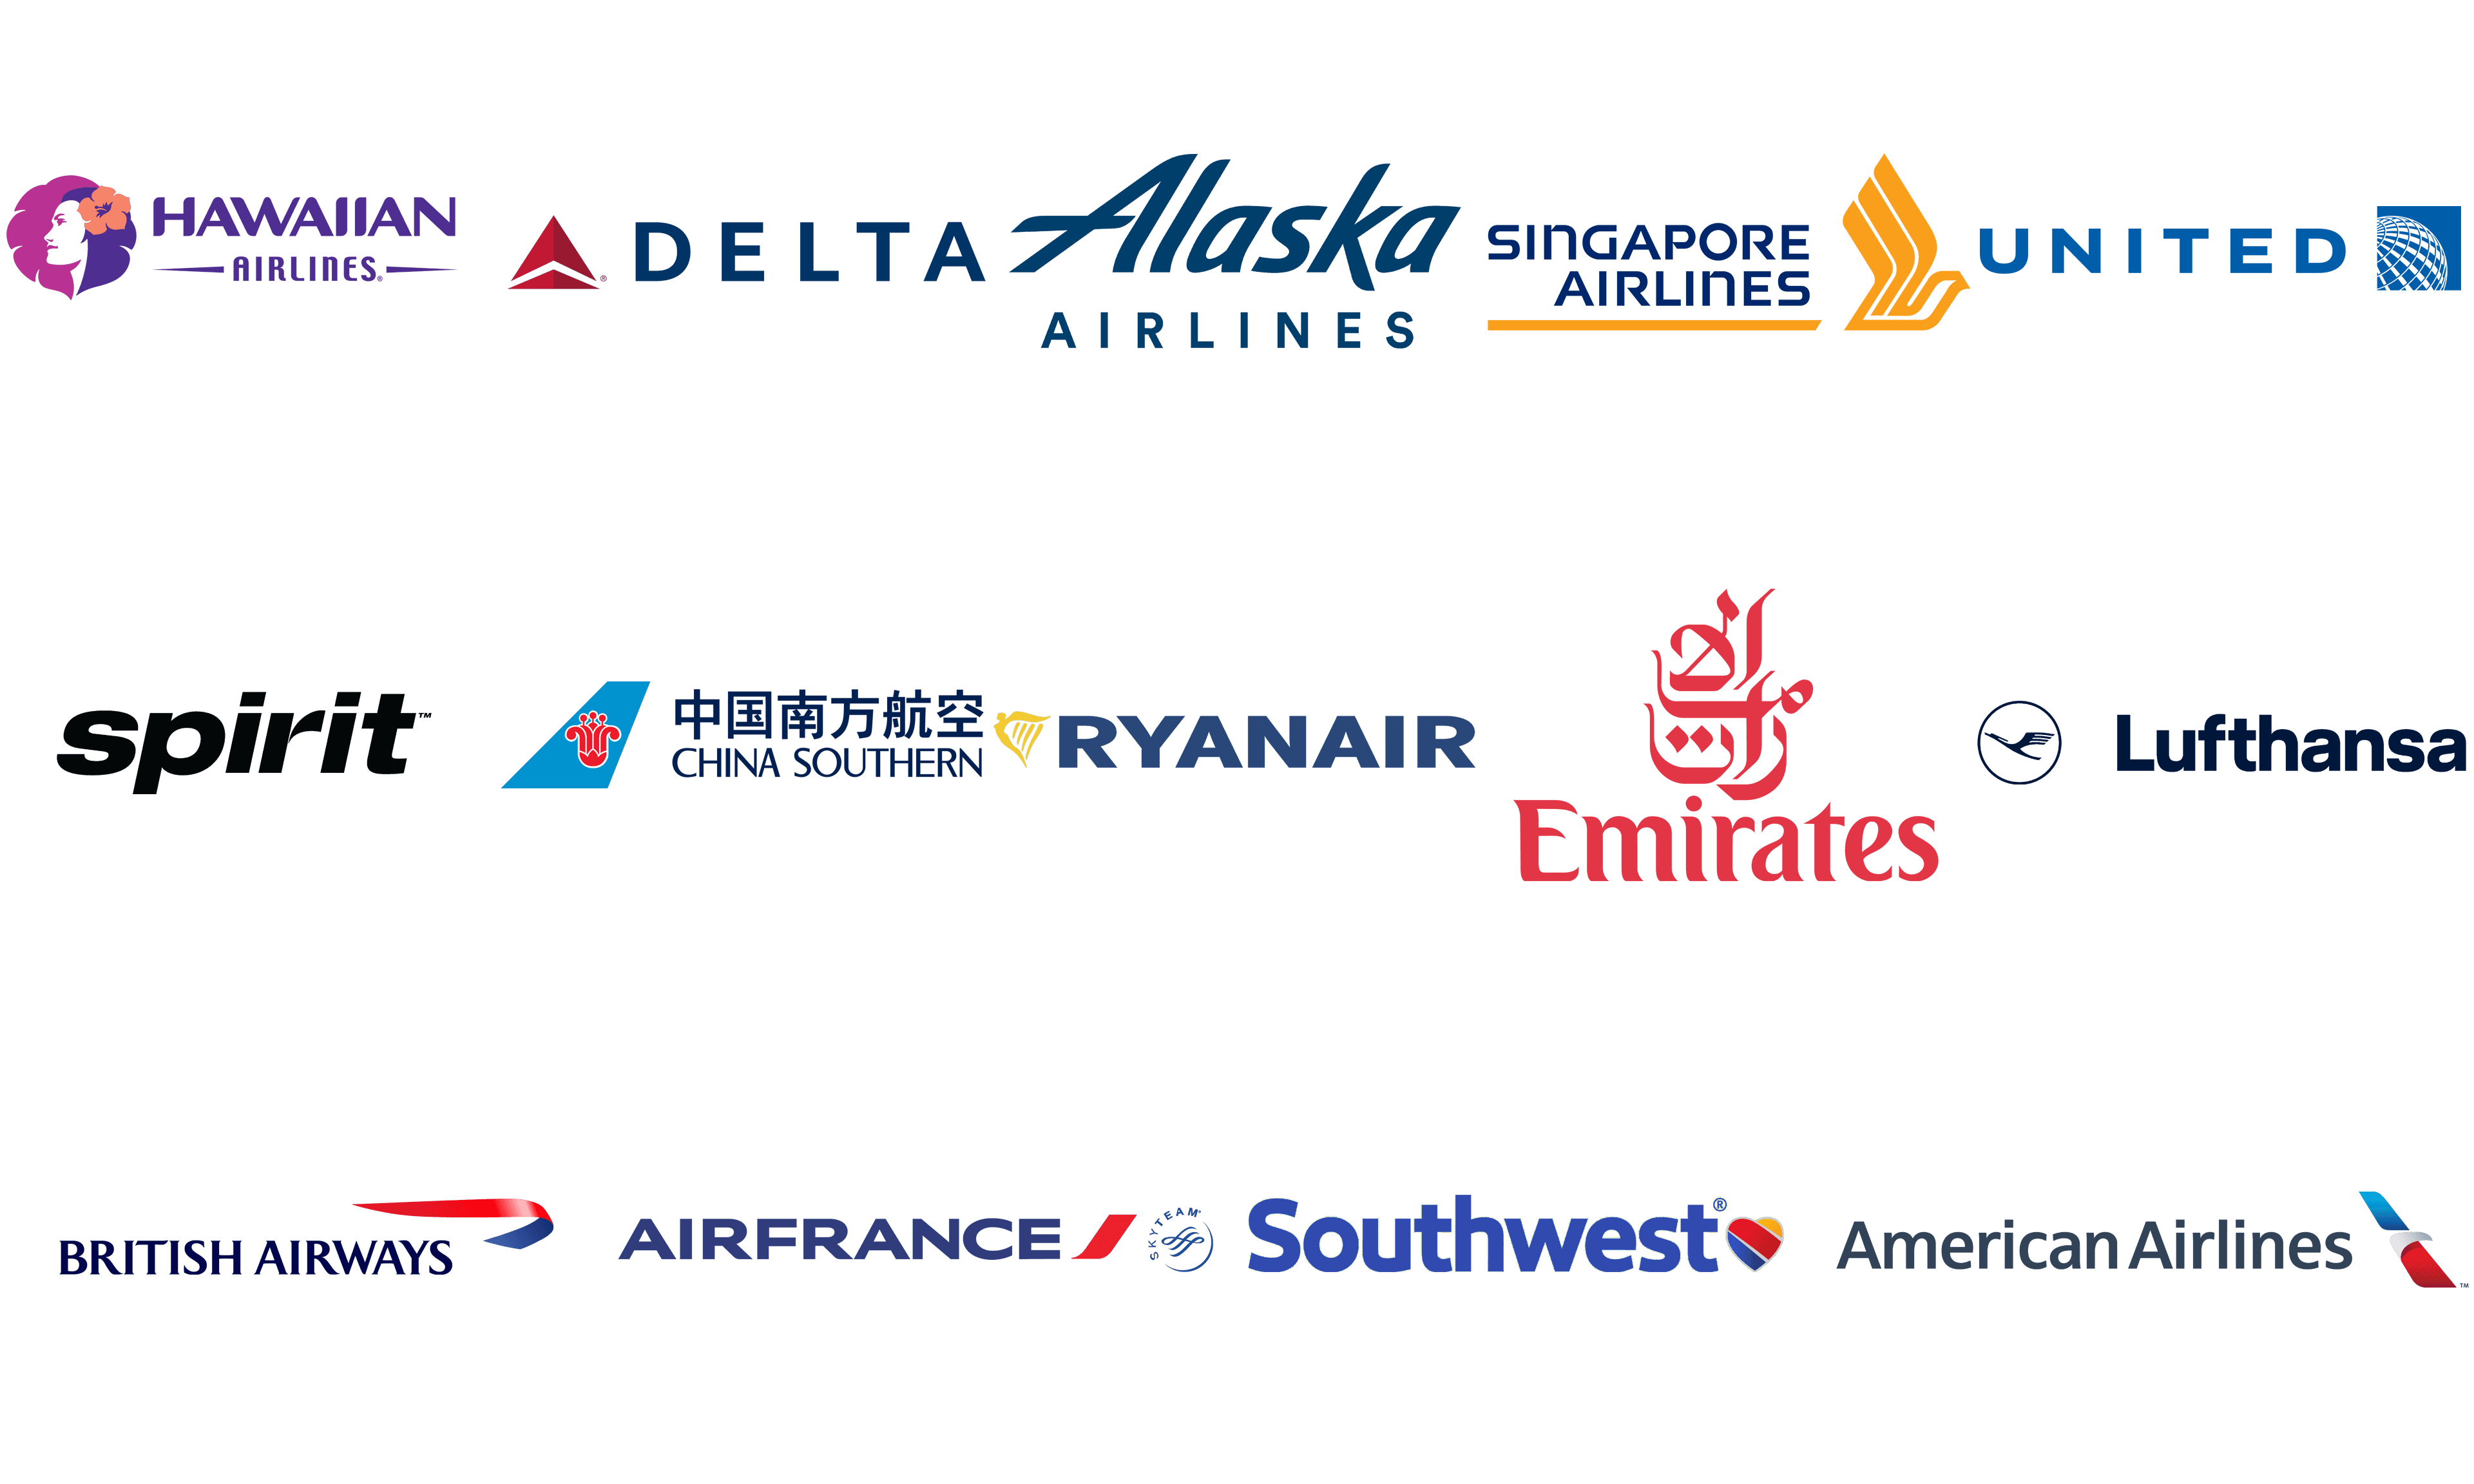 The most popular Airline logos and brands in the World